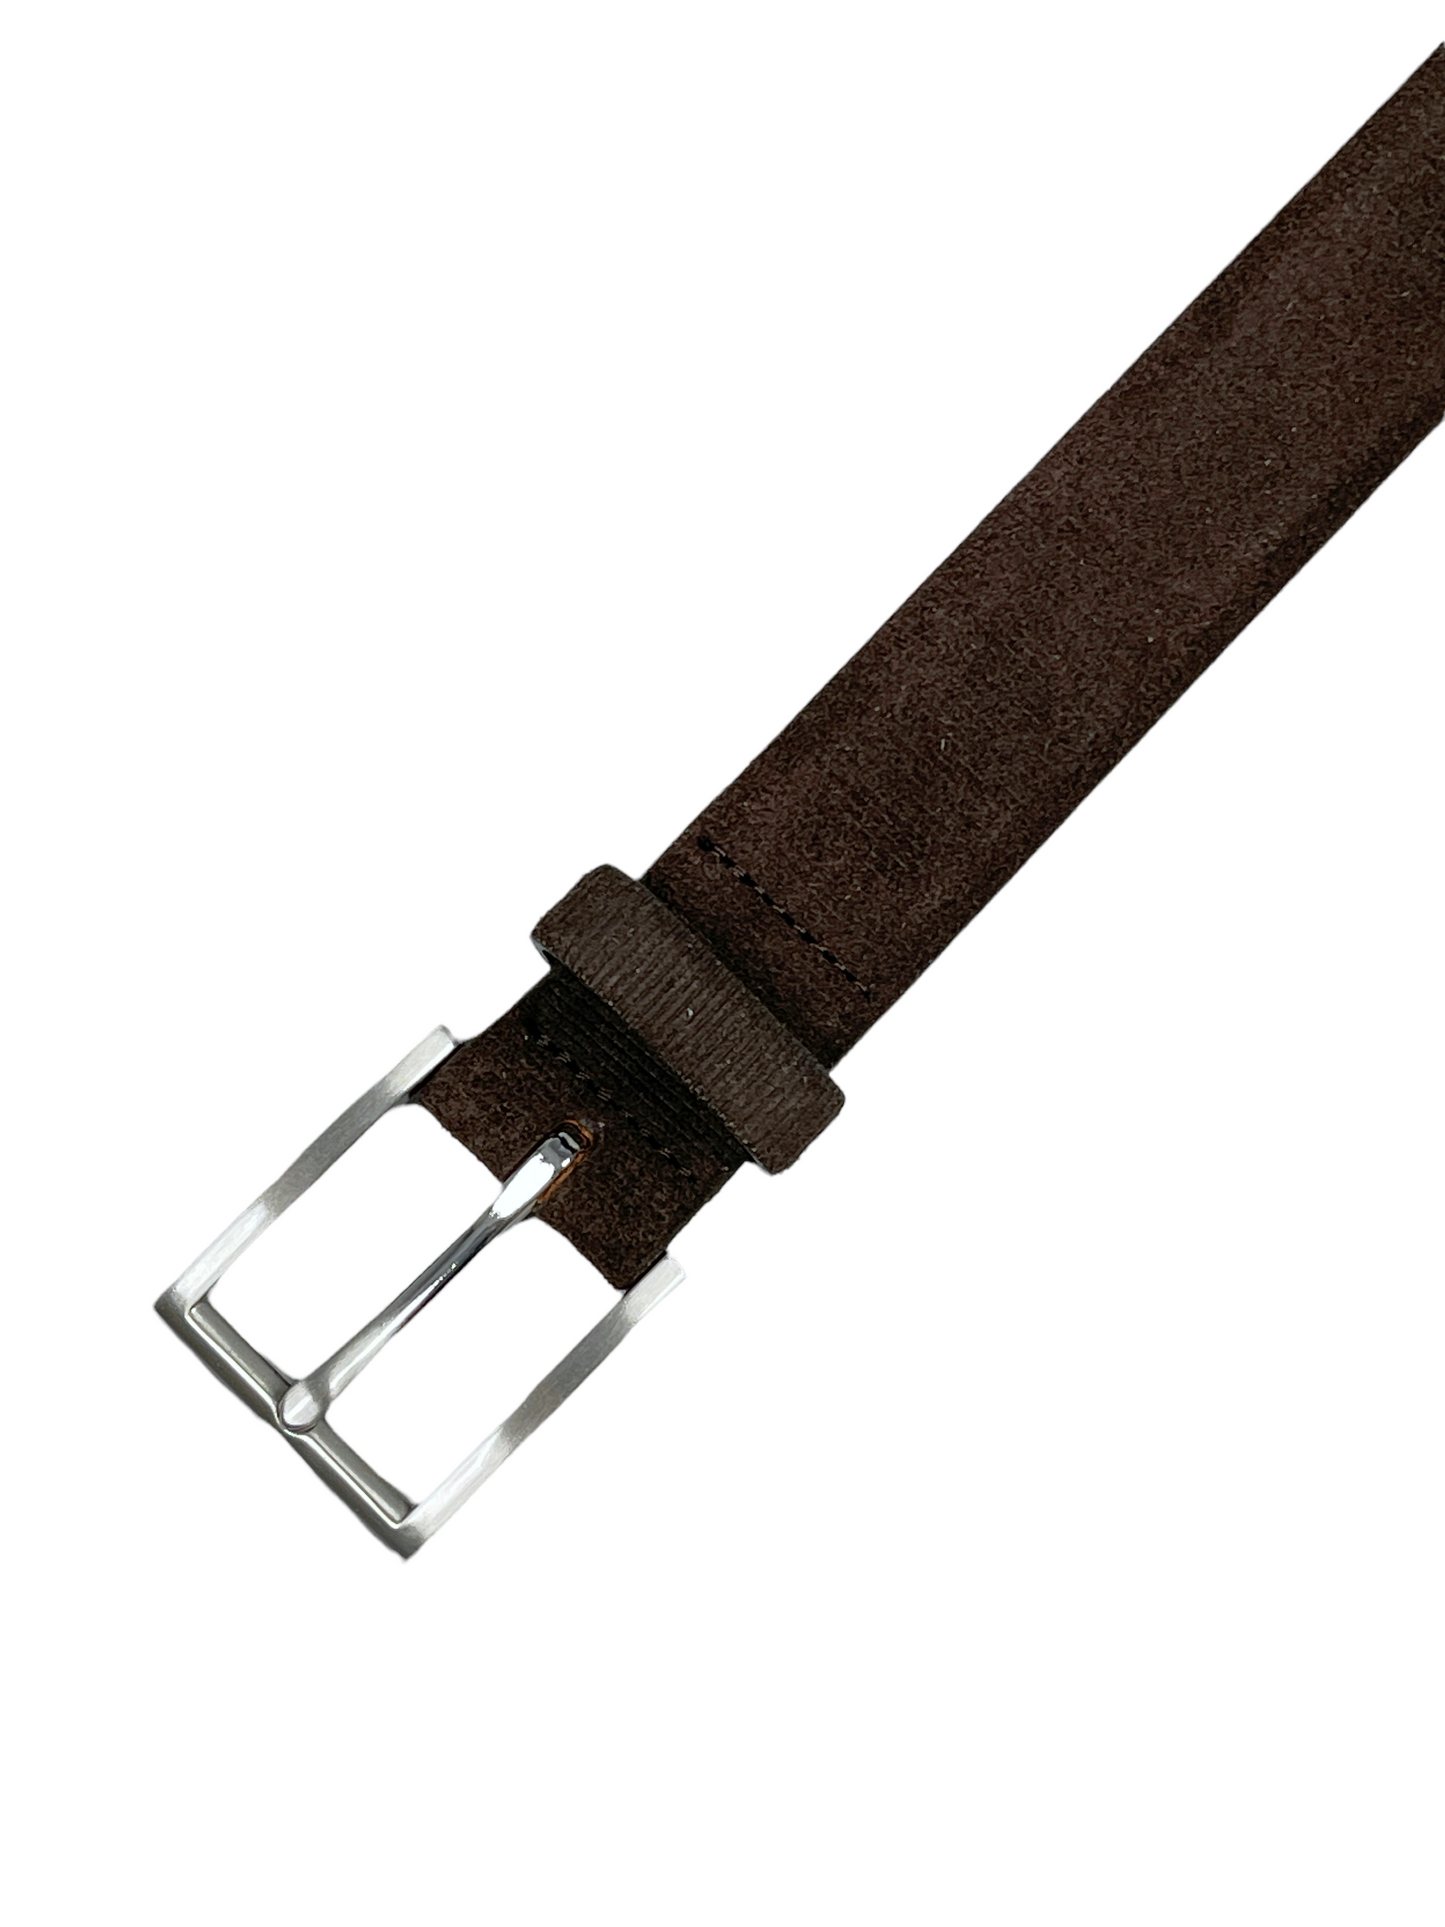 Brooks Brothers Brown Leather Belt Size 36 -Genuine Design luxury consignment Calgary, Alberta, Canada New and pre-owned clothing, shoes, accessories.